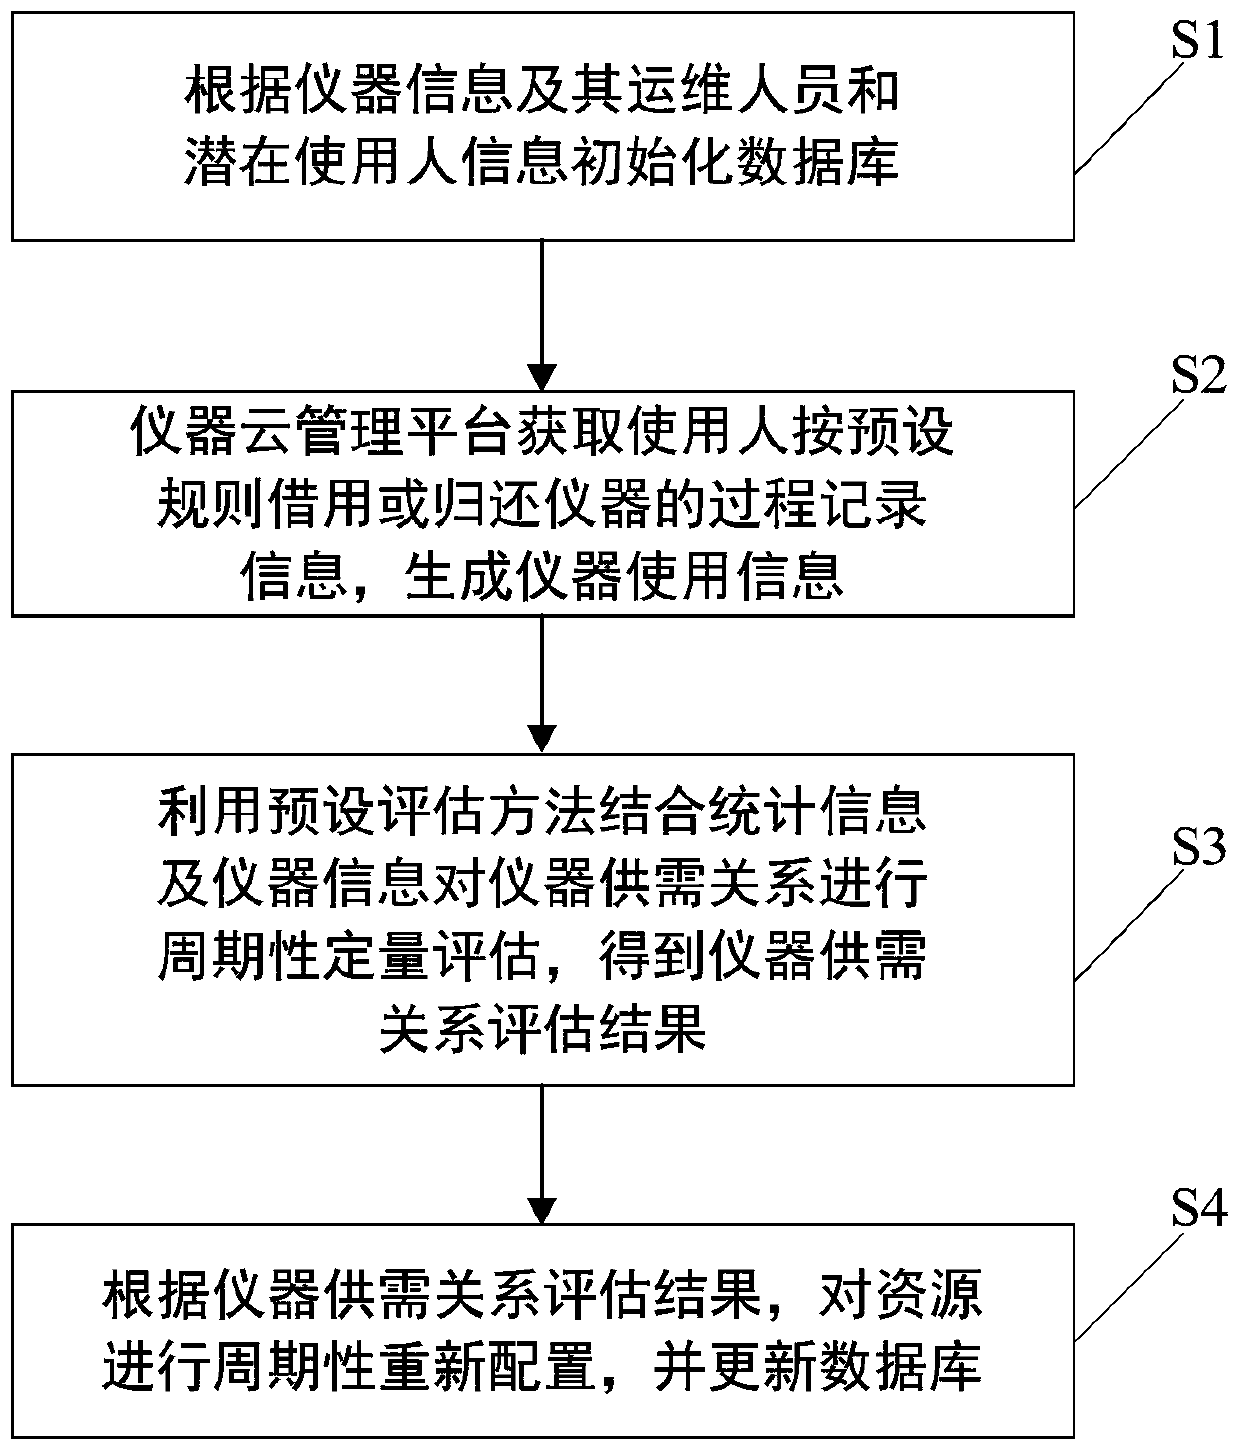 Instrument resource cloud management and configuration method and system